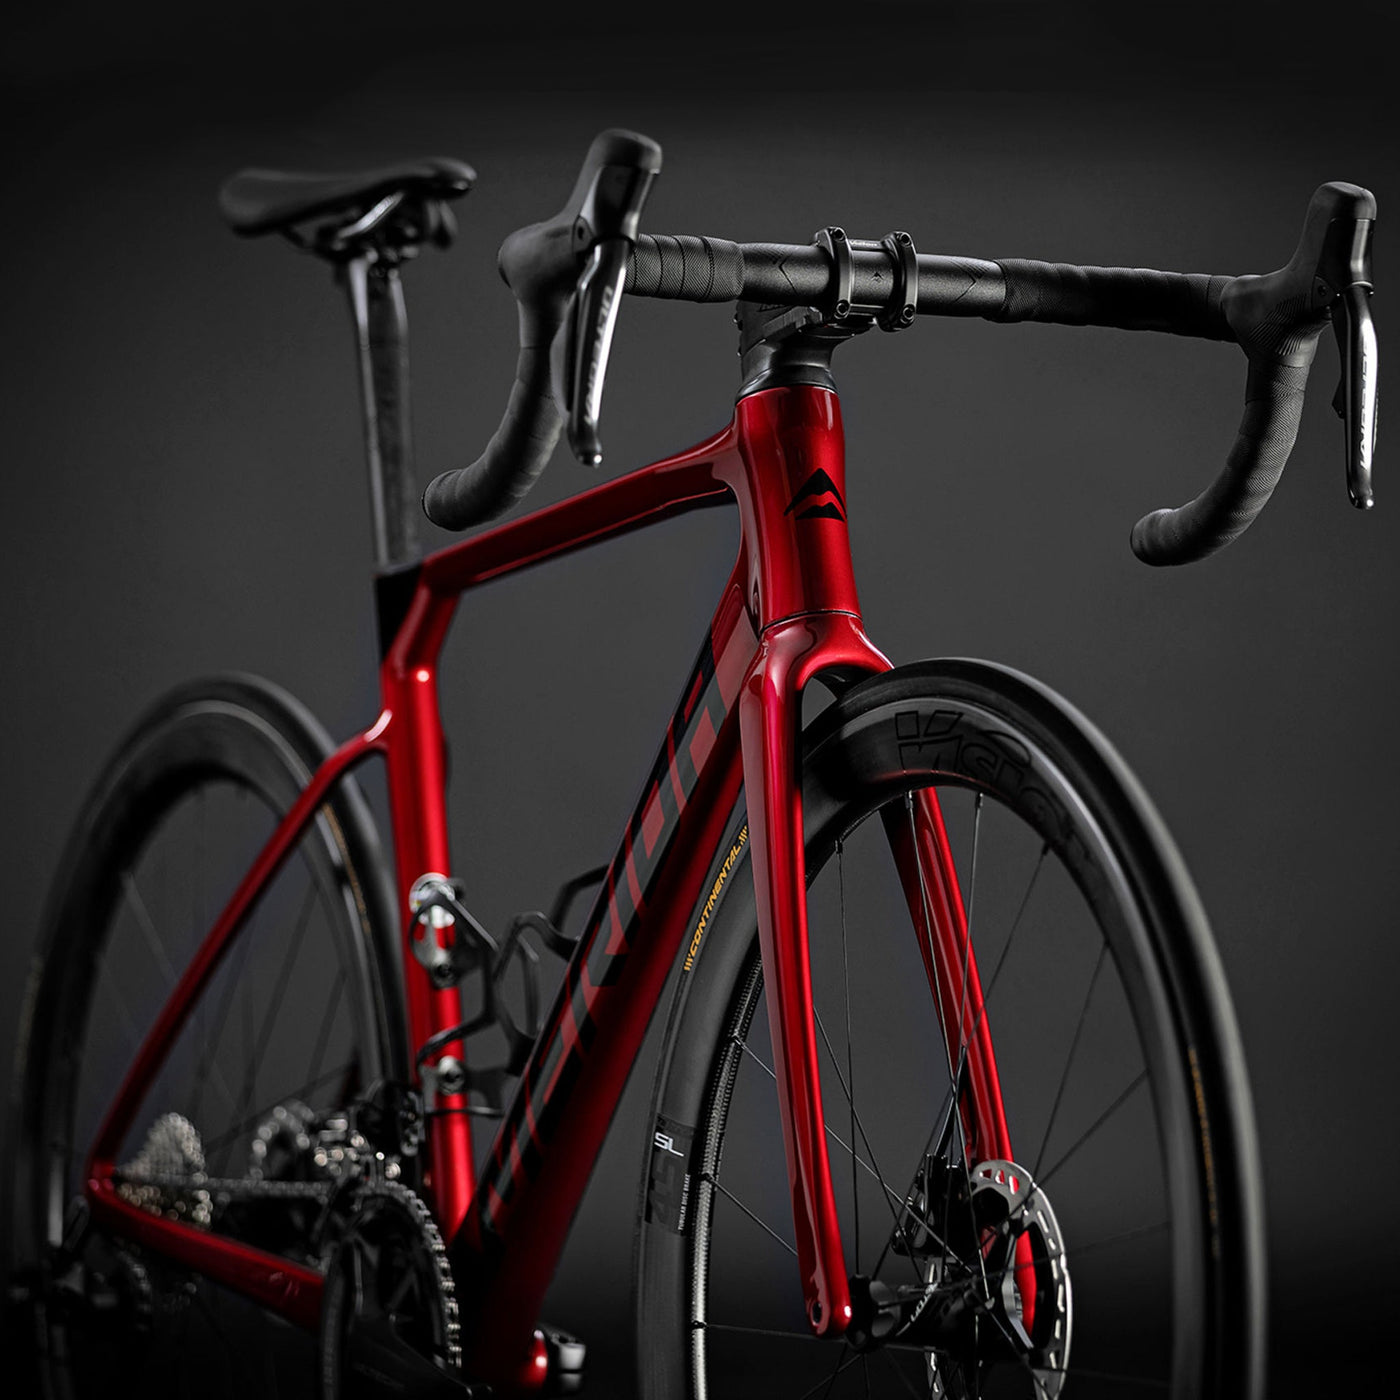 Road cycling endurance and long distance bikes with aero tube profiles and relaxed geometry for long all day rides light weight and comfortable